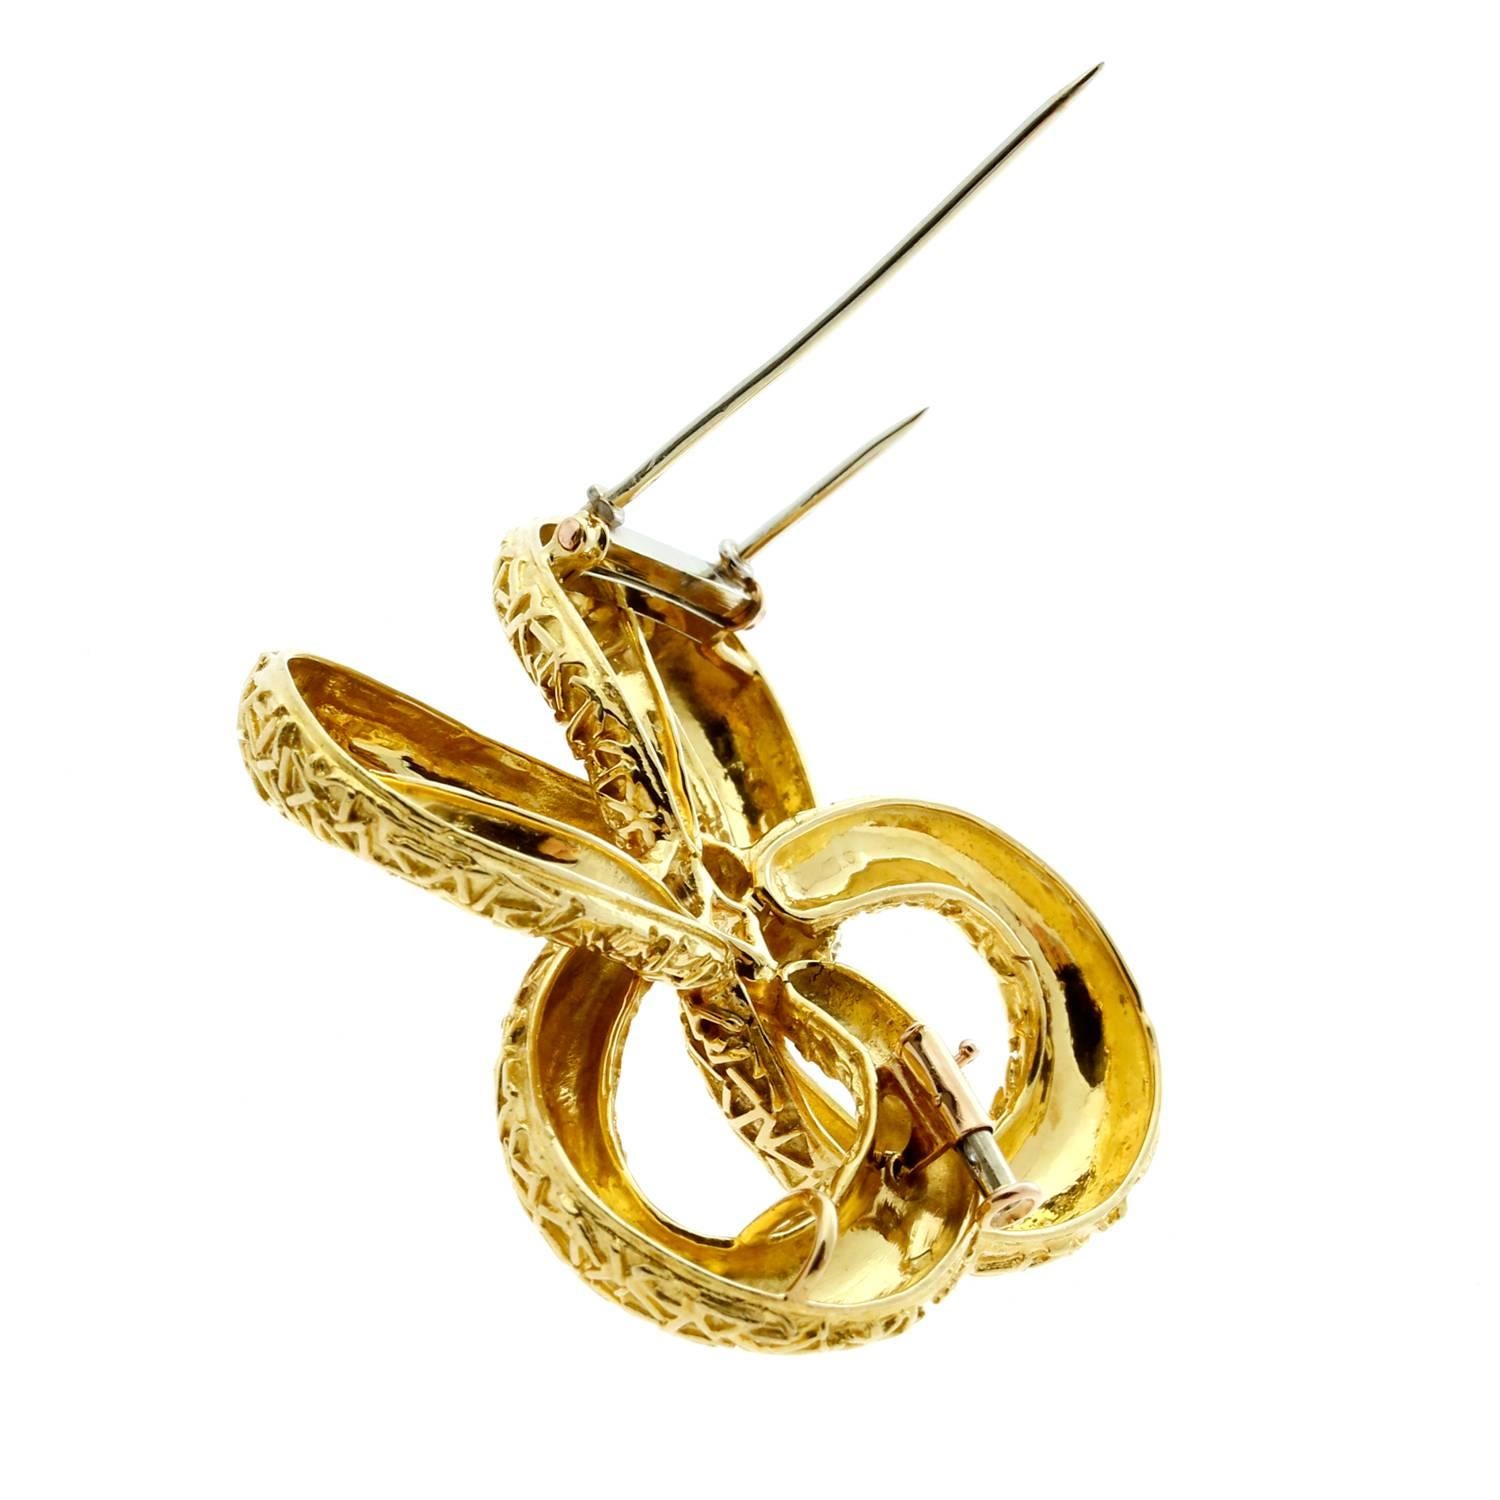 A stunning Van Cleef & Arpels gold brooch crafted in 18k yellow gold, may be worn as a necklace enhancer as well.